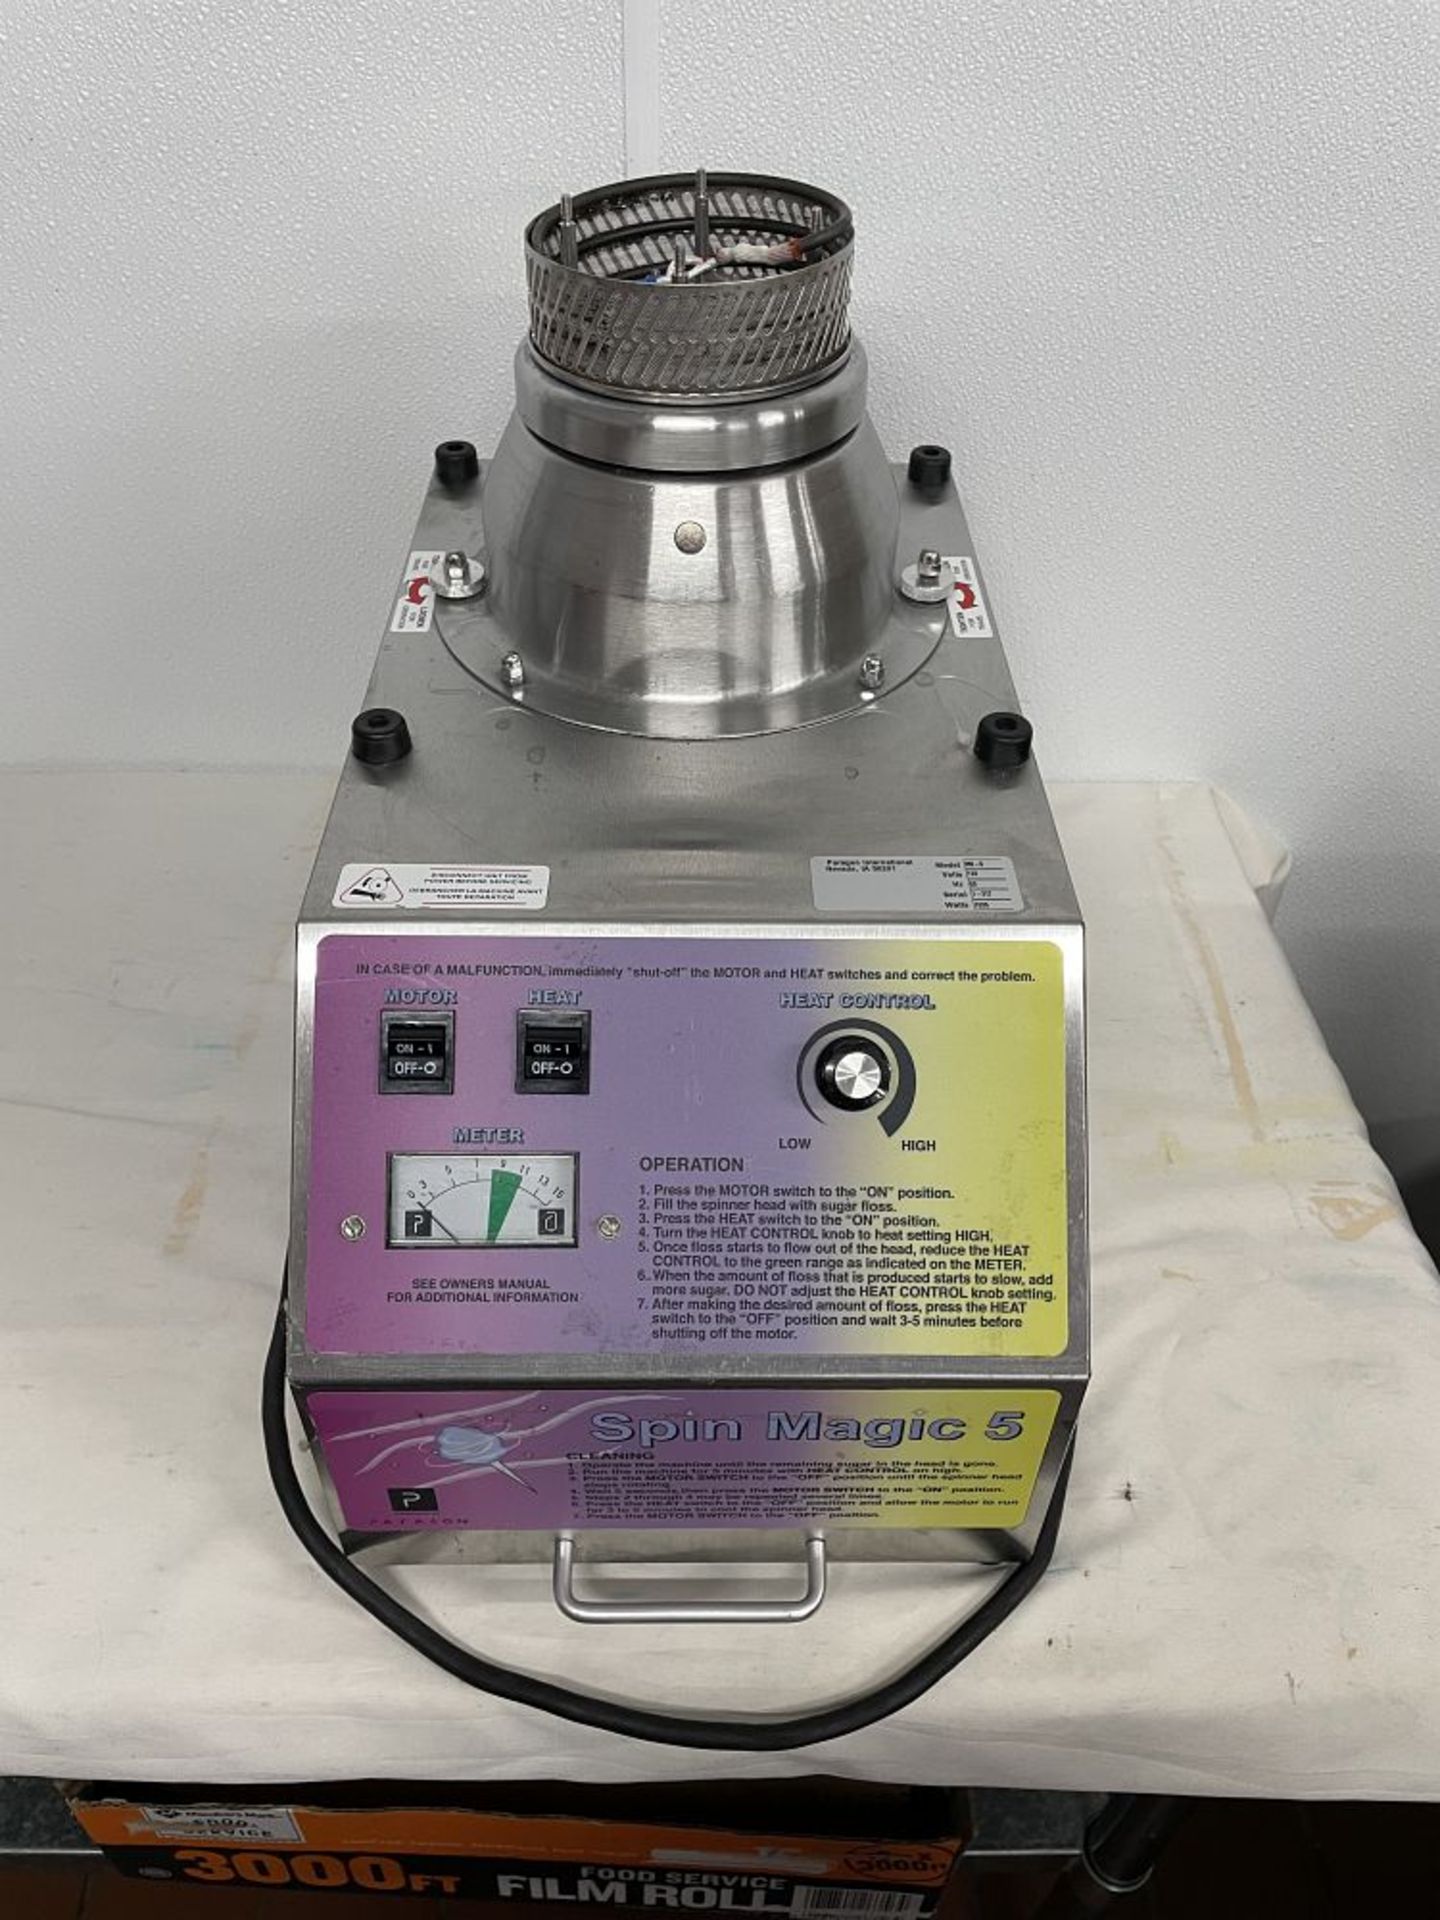 MAGIC SPIN COTTON CANDY MACHINE, MDL US-6